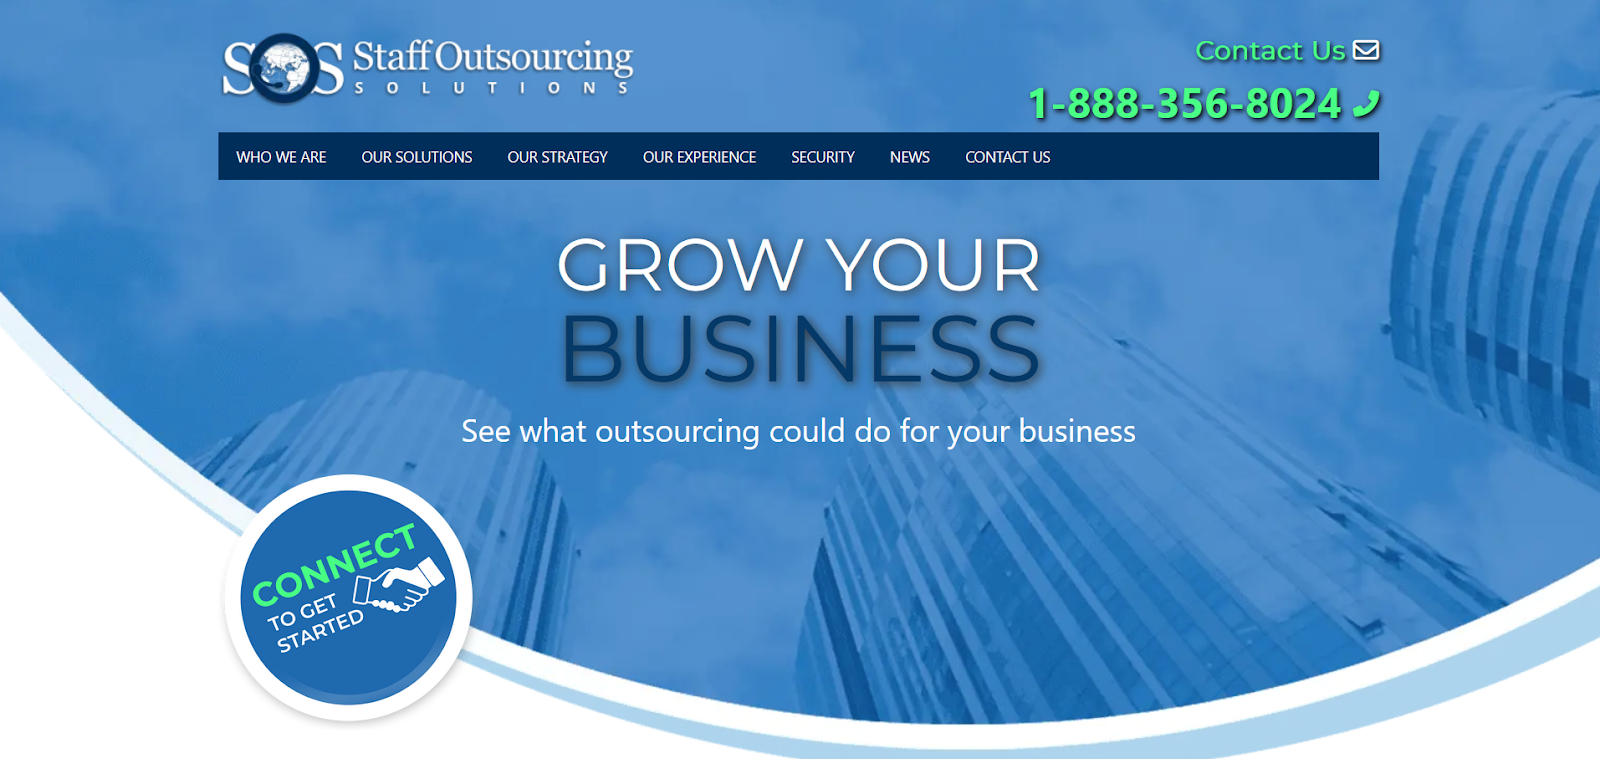 Staff Outsourcing - Top 10 Call Centers in the Philippines